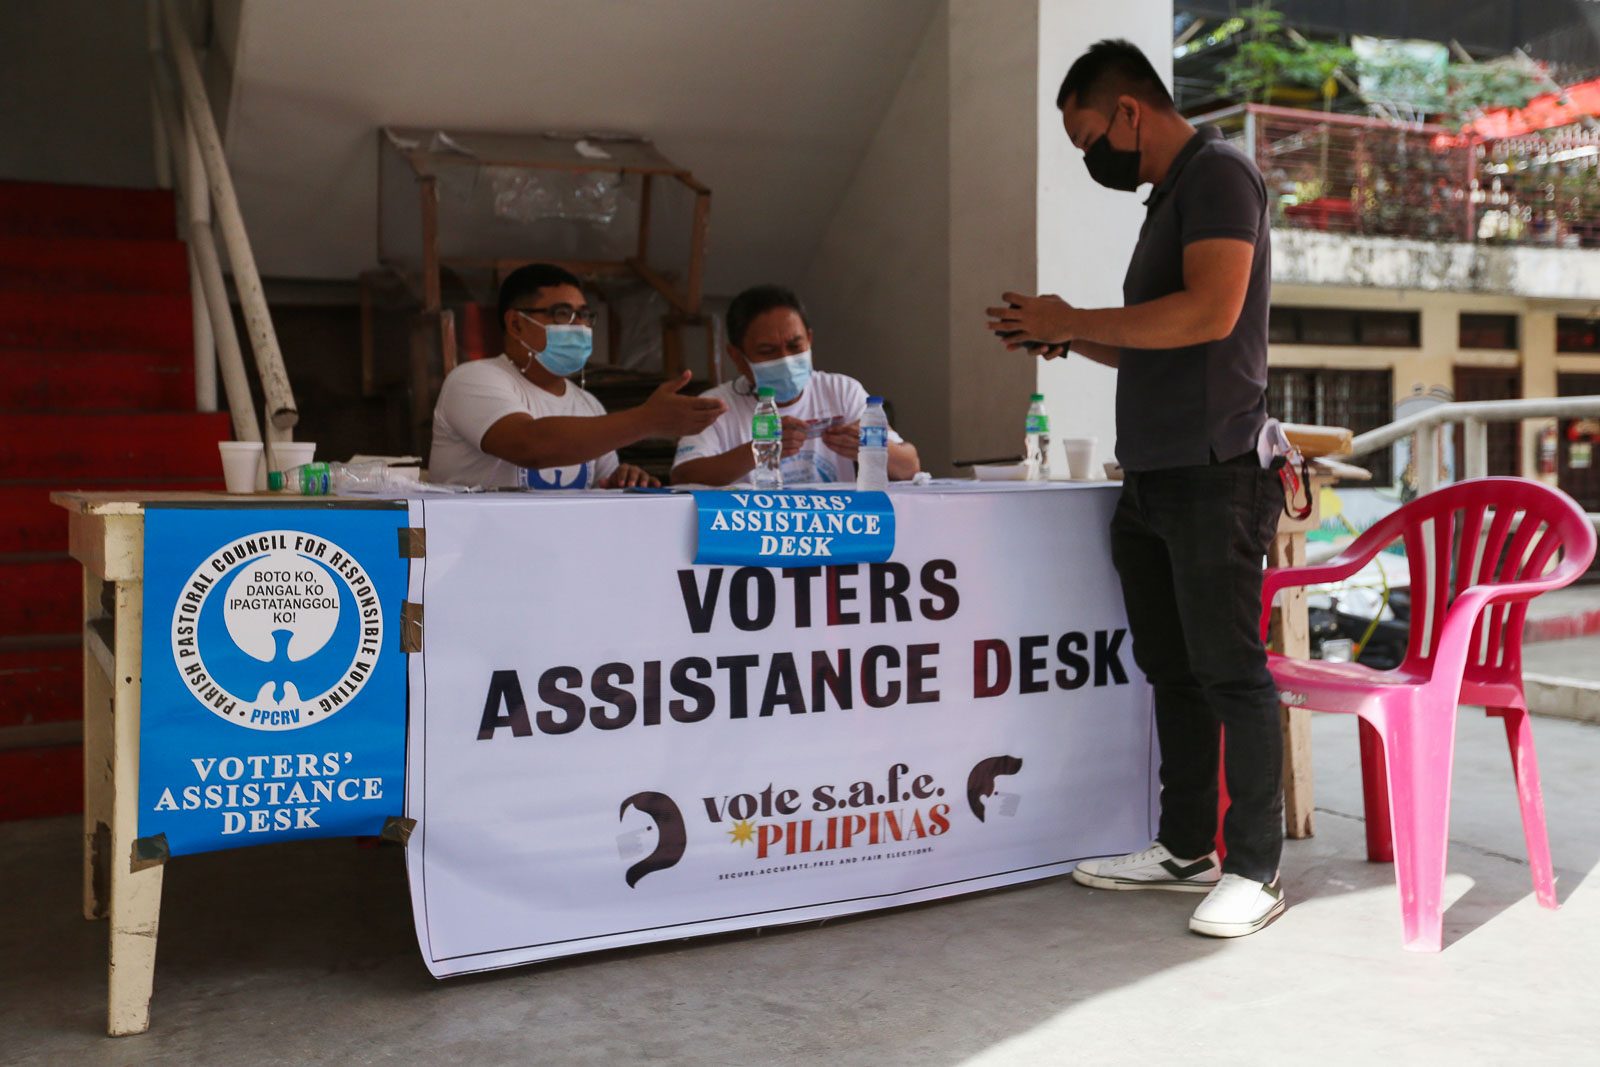 Most Filipinos find pre-election surveys good for country – SWS